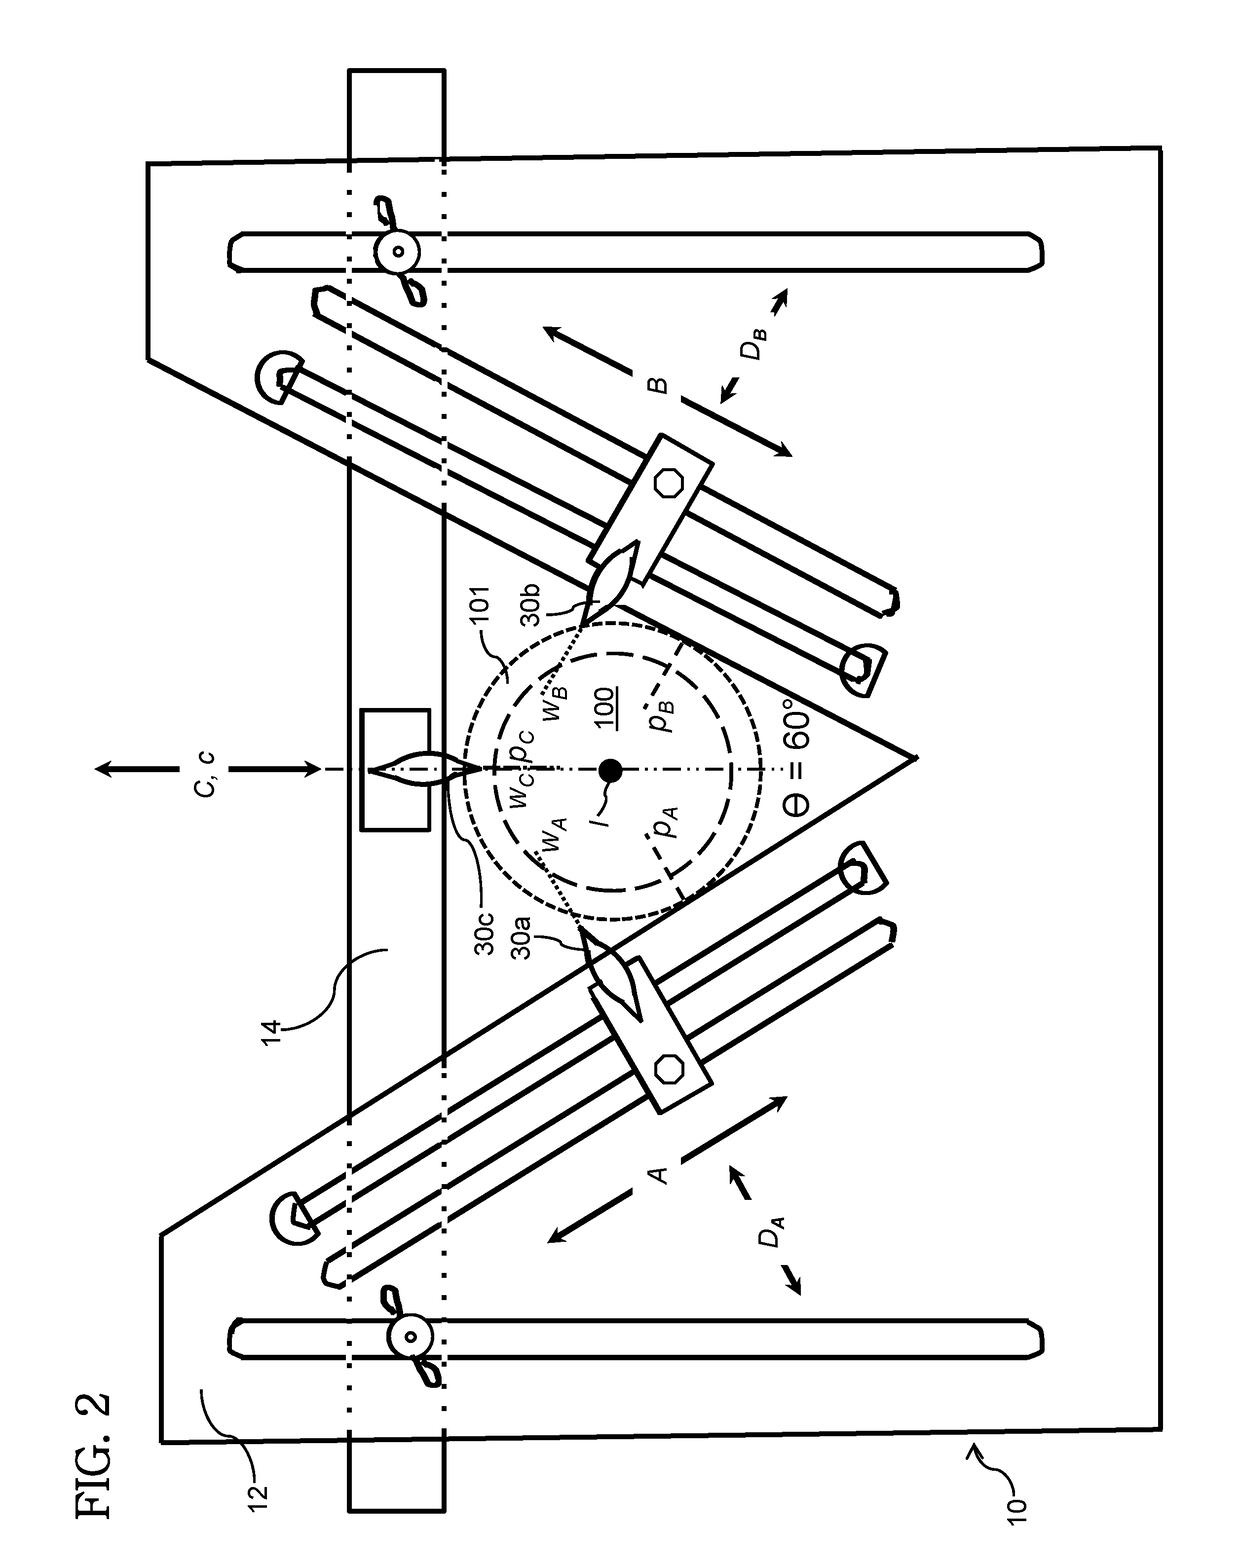 Cutting device for removing a cable jacket